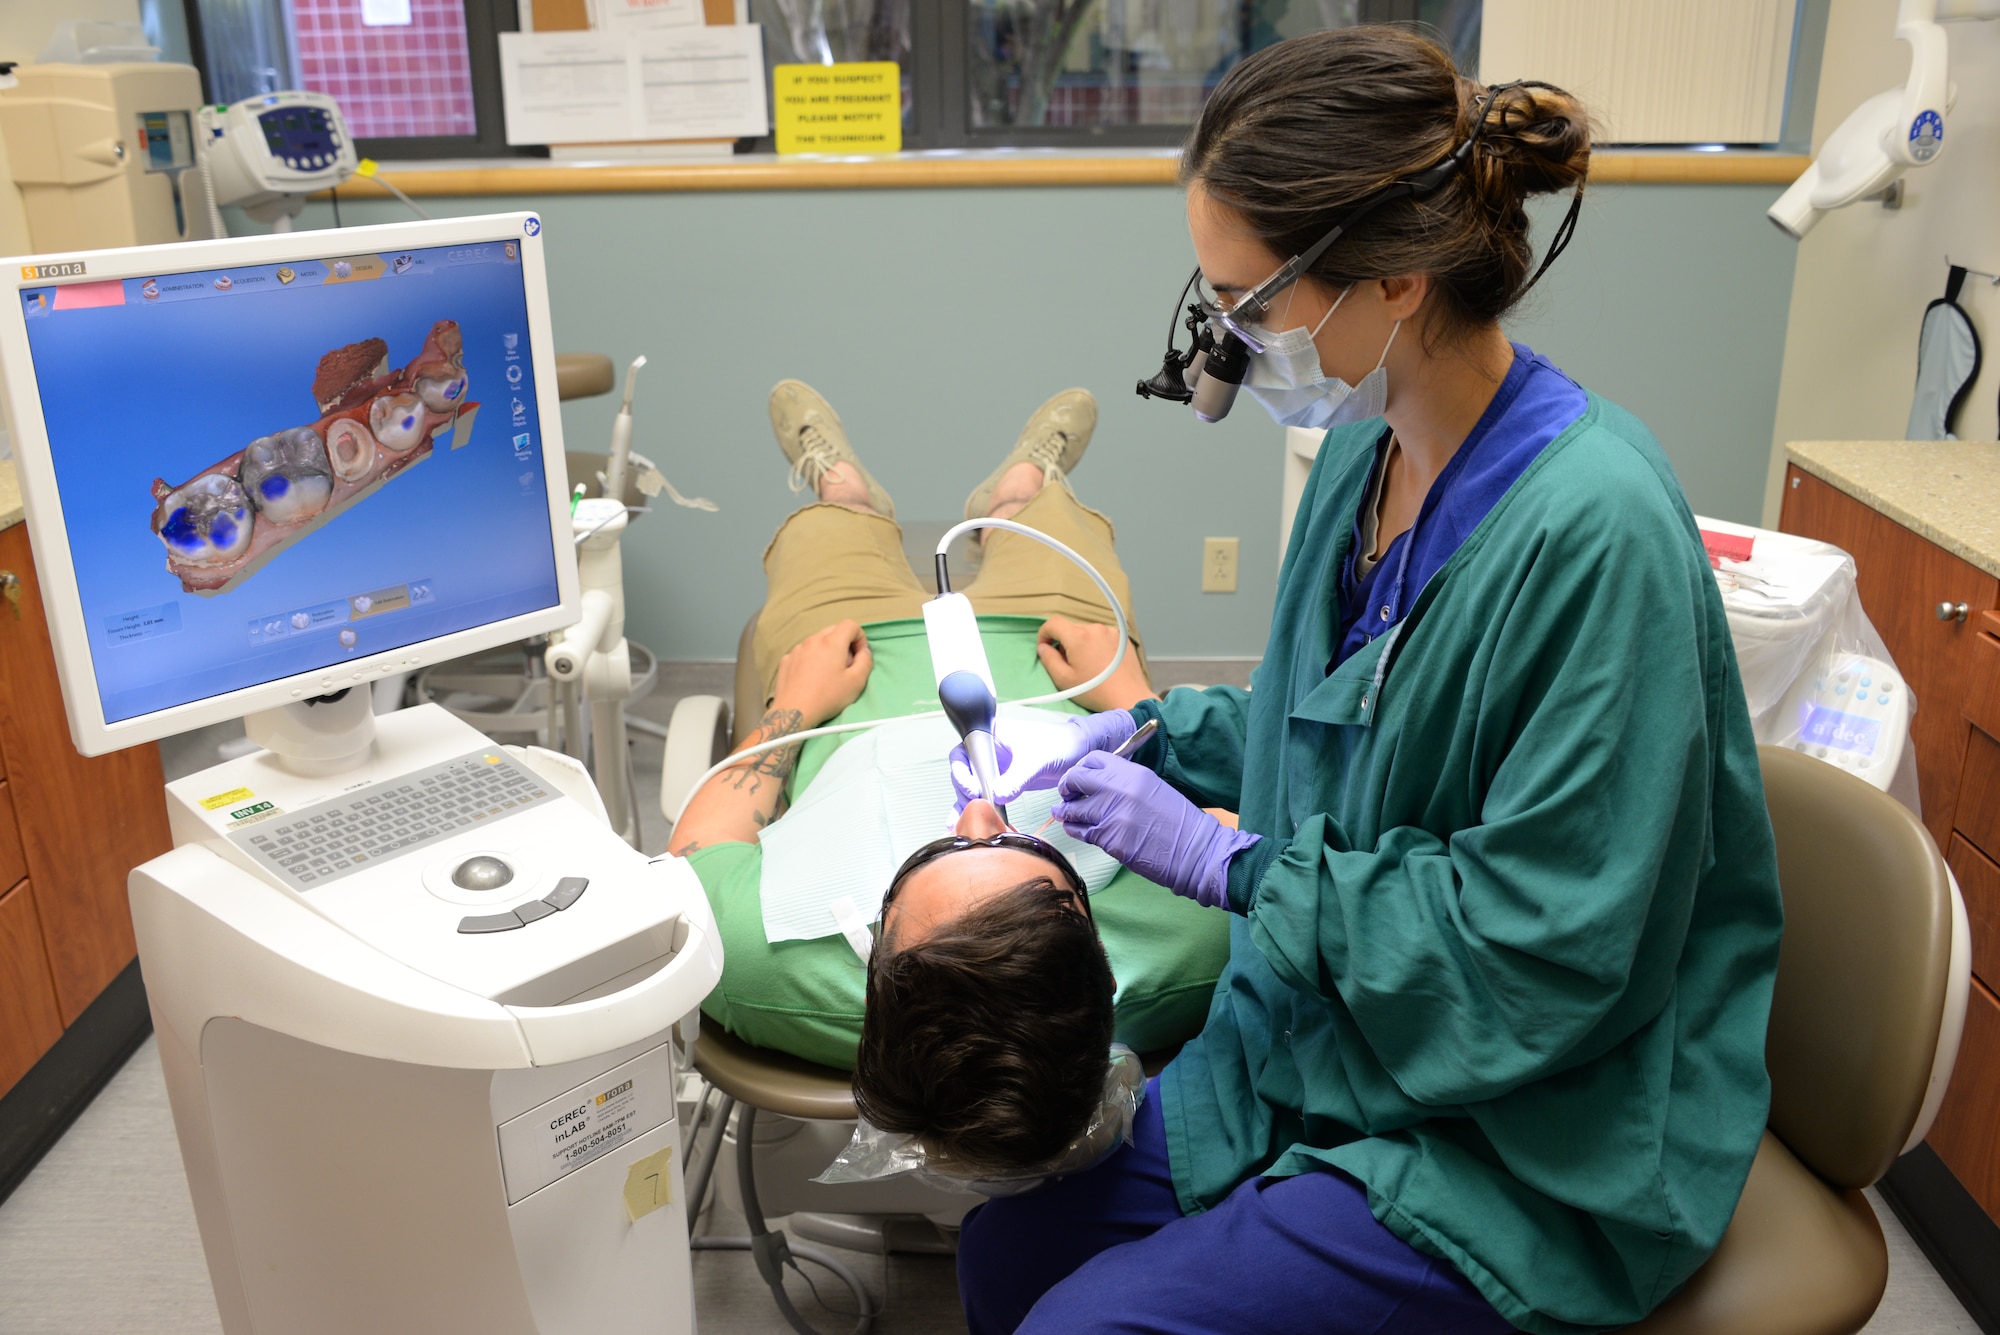 Capt. Eileen Welch, 60th DS advanced education in general dentistry resident, uses the inter oral digital scan for a cerec cad/cam crown May 2 at Travis Air Force Base, California. The patient is treated by using the crown that went through several steps in the dental clinic before it was placed on the patient's tooth. (U.S. Air Force photo by Senior Airman Amber Carter)